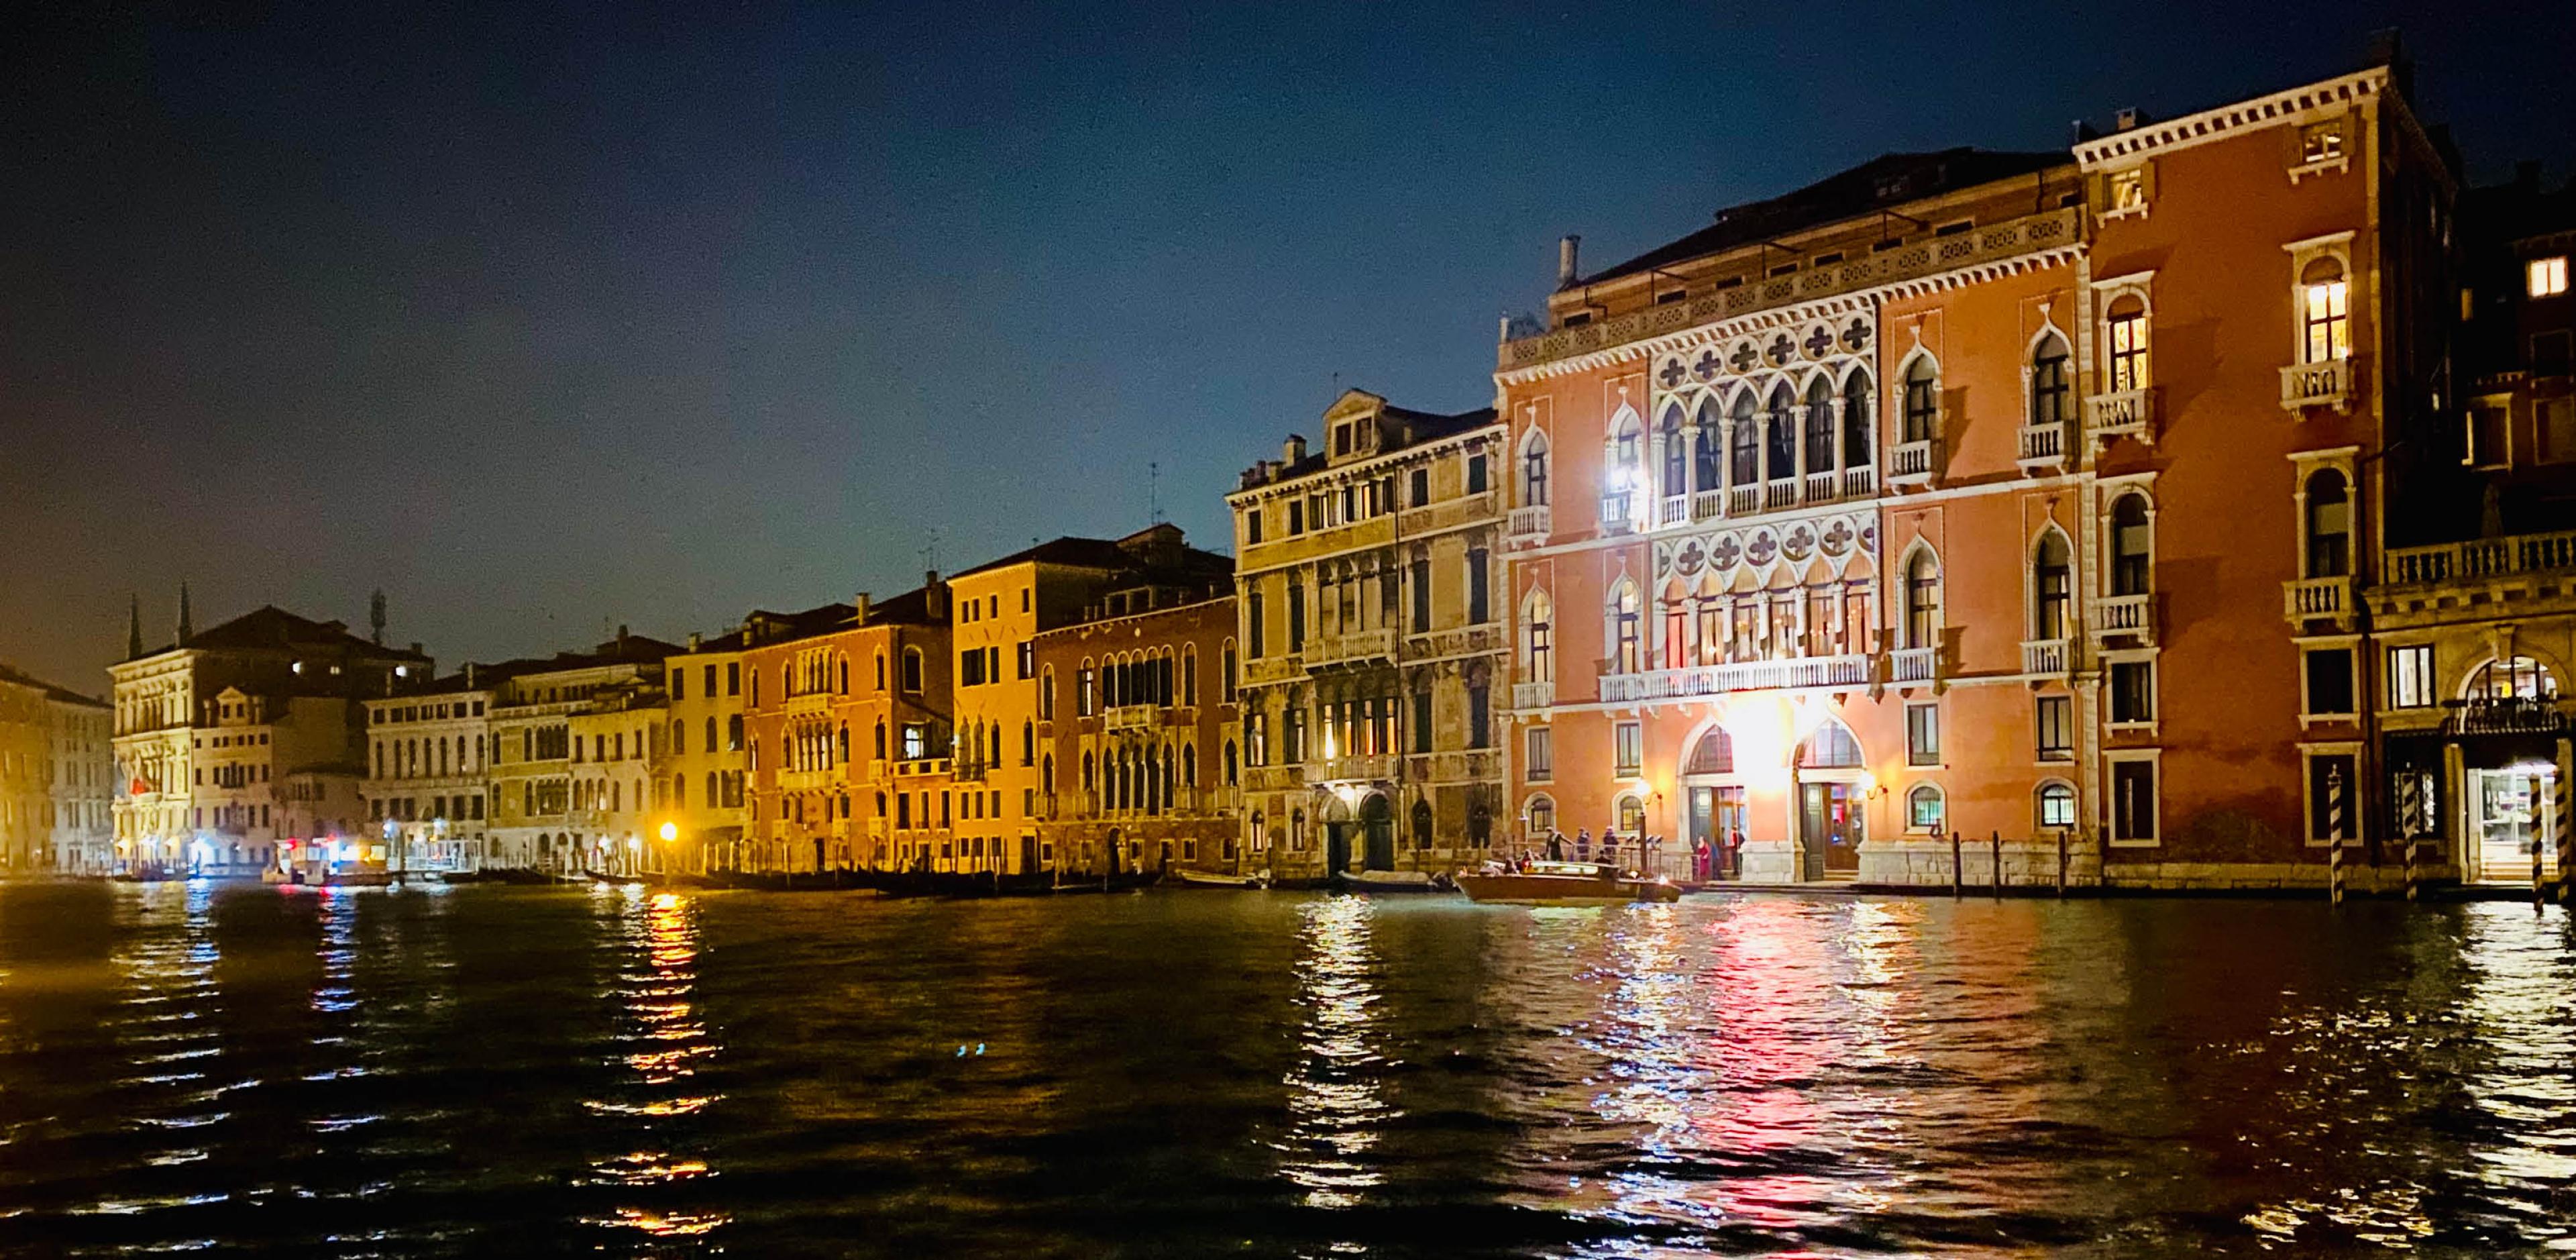 Venice's Grand Canal at night